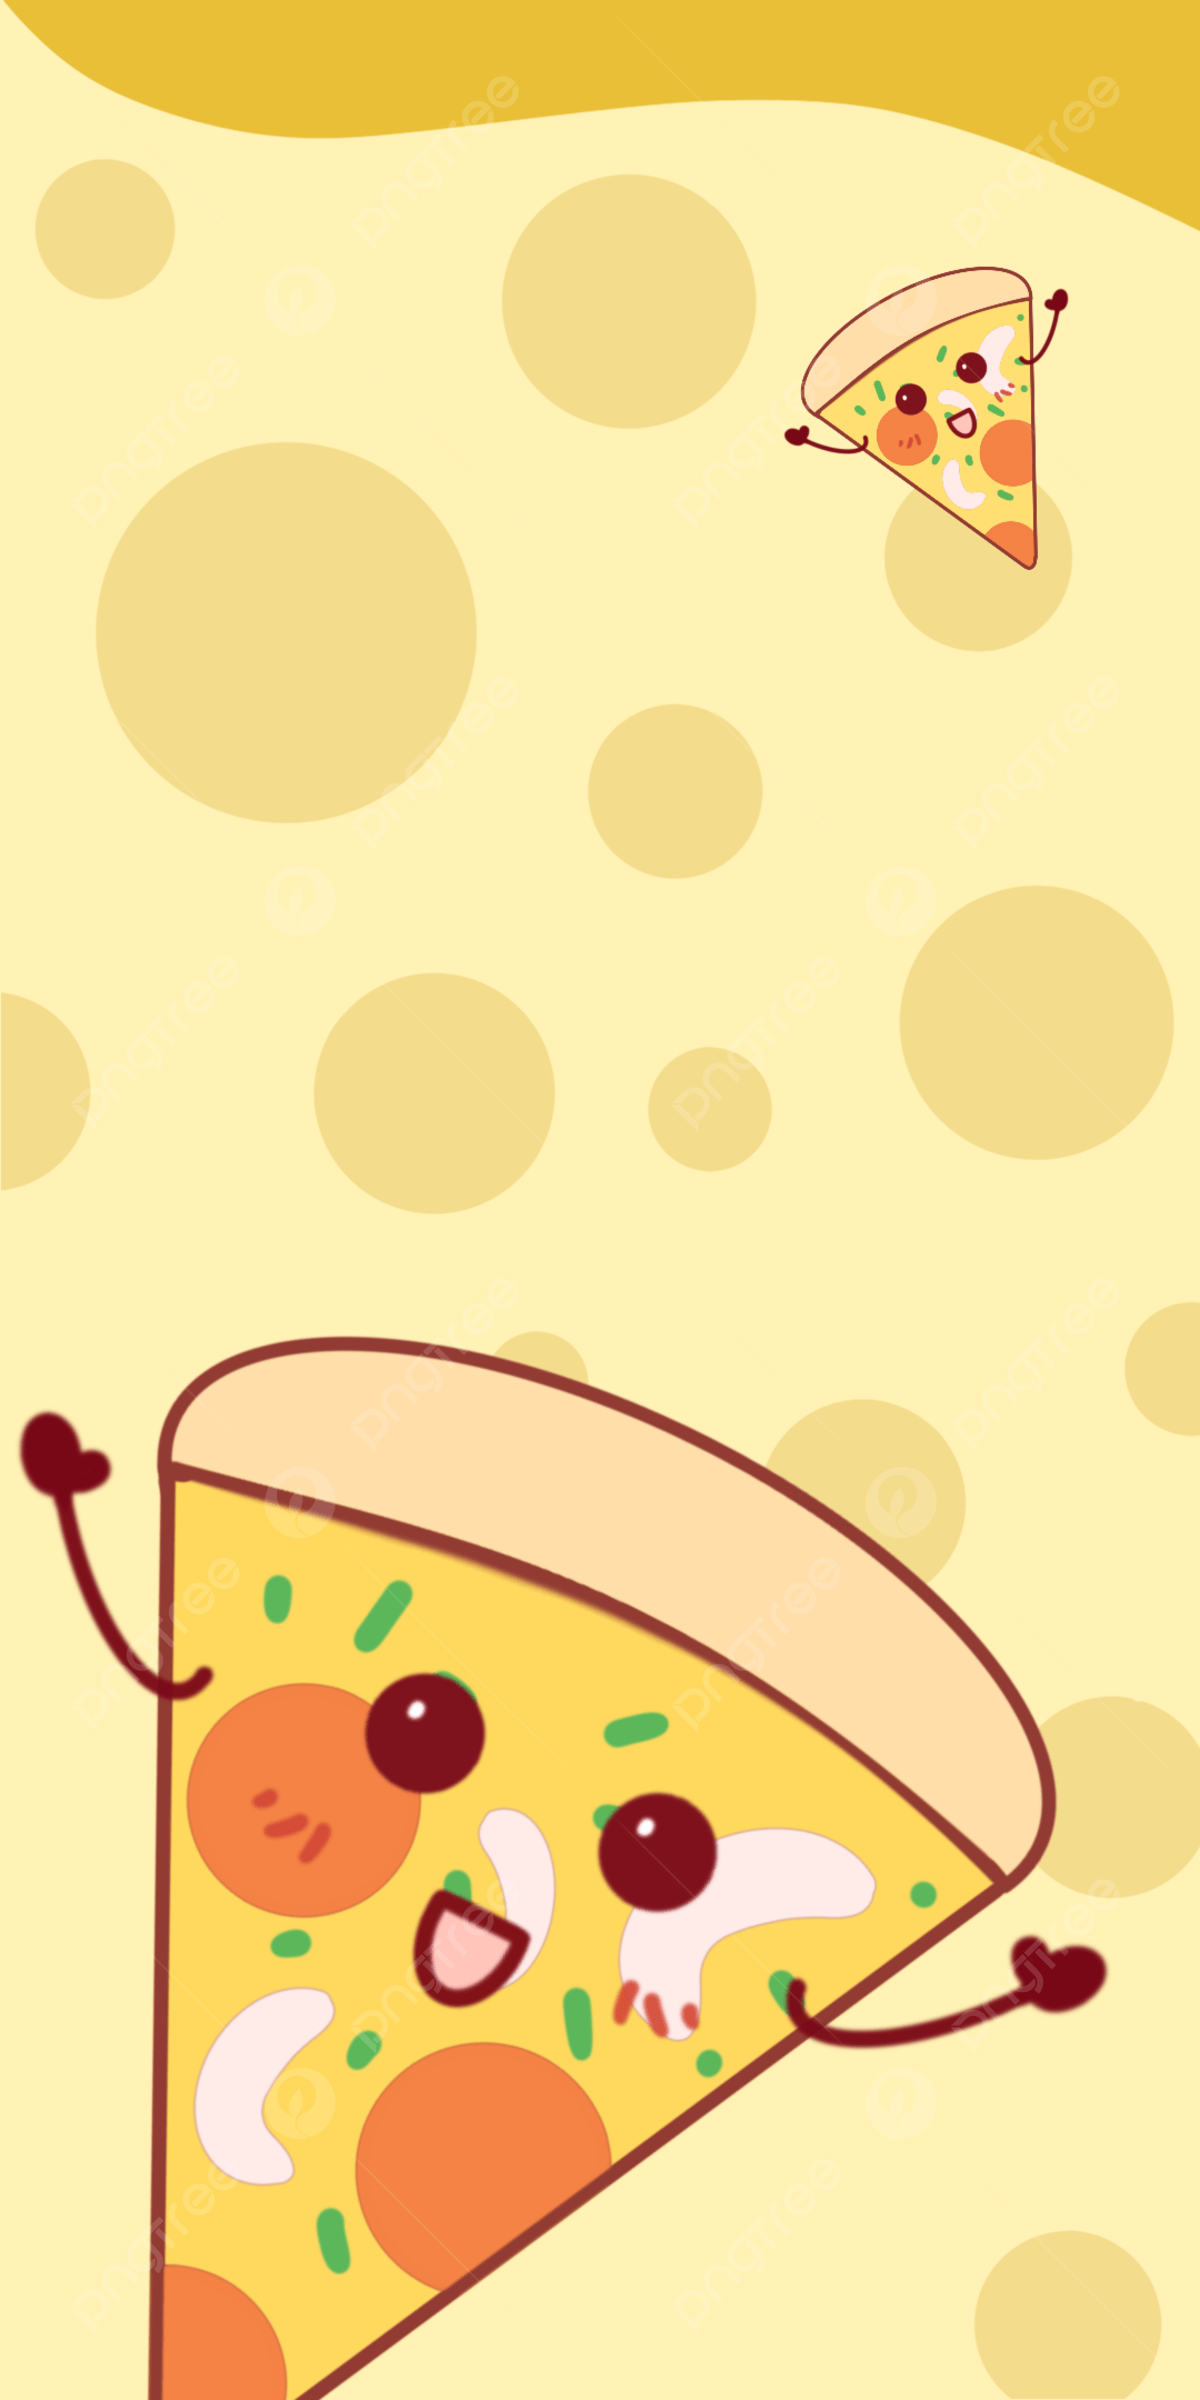 Pizza Punching Mobile Phone Wallpaper Background, Cute, Food, Phone Wallpaper Background Image for Free Download